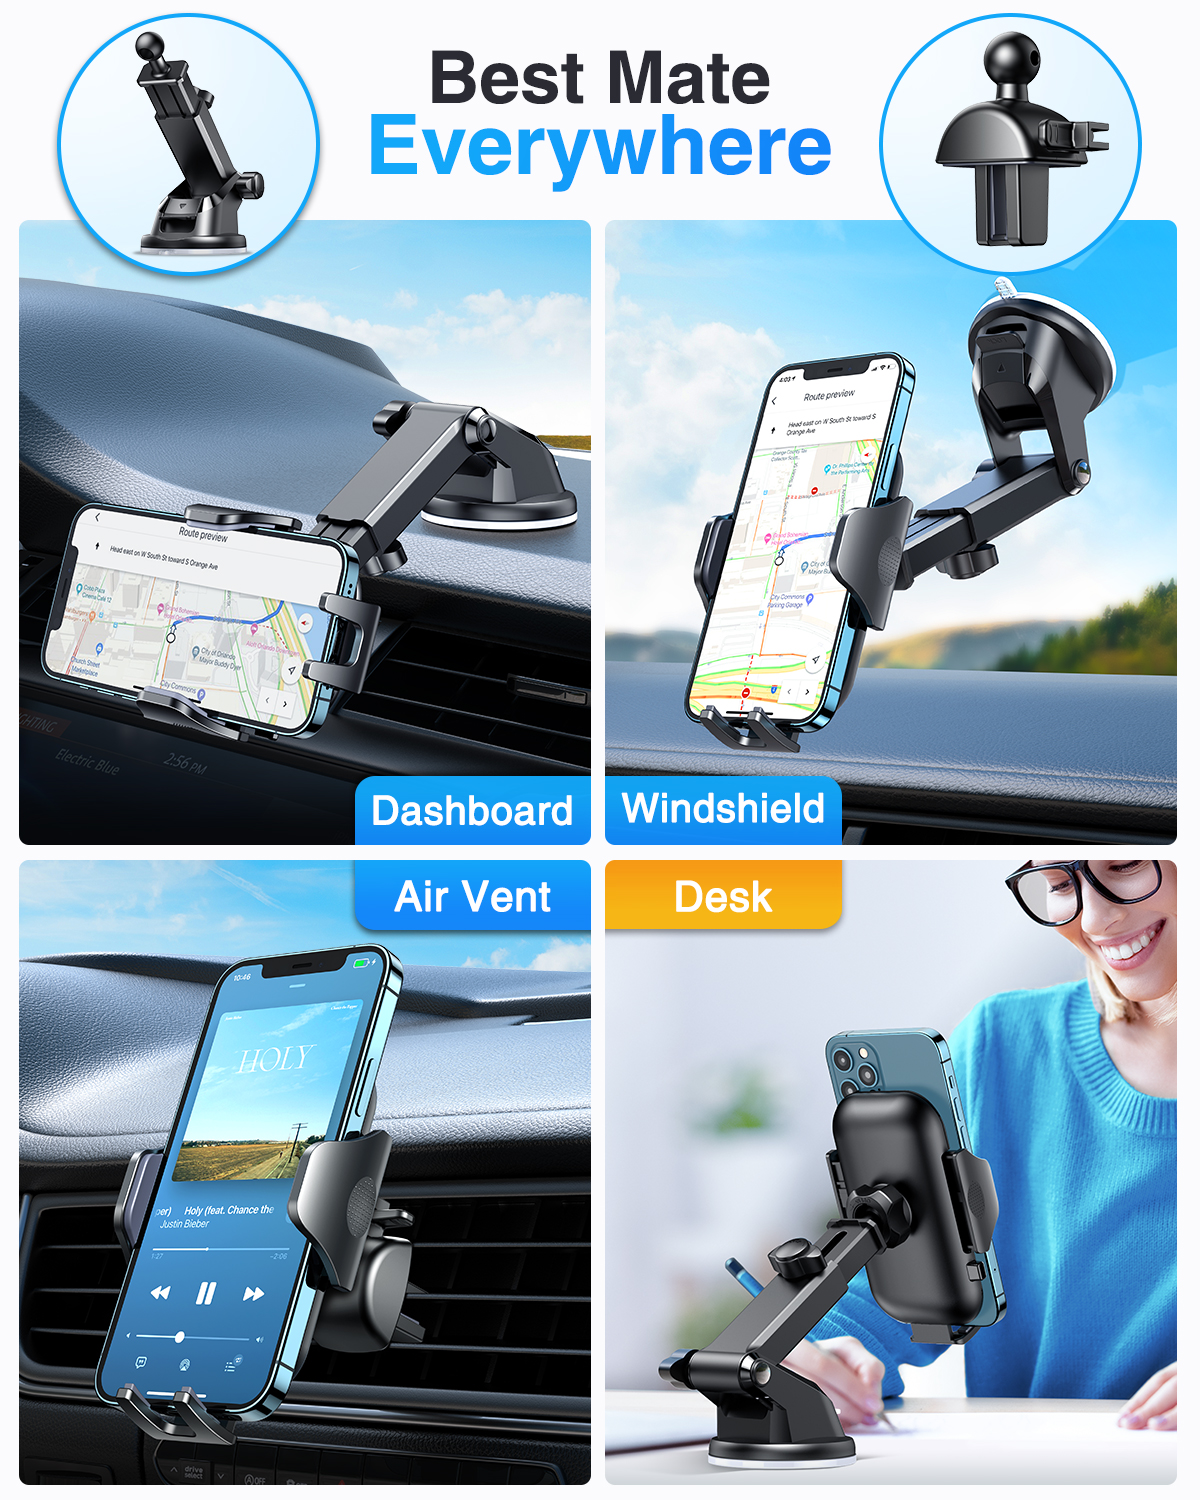 Universal Car Cell Phone Mount Holder 2 in 1 Windshield and Dashboard with Washable Strong Sticky Gel Pad for iPhone X R Xs Max 8 Plus 7 Samsung Galaxy S9 S8 Note 8 LG and Other Smart Phone 